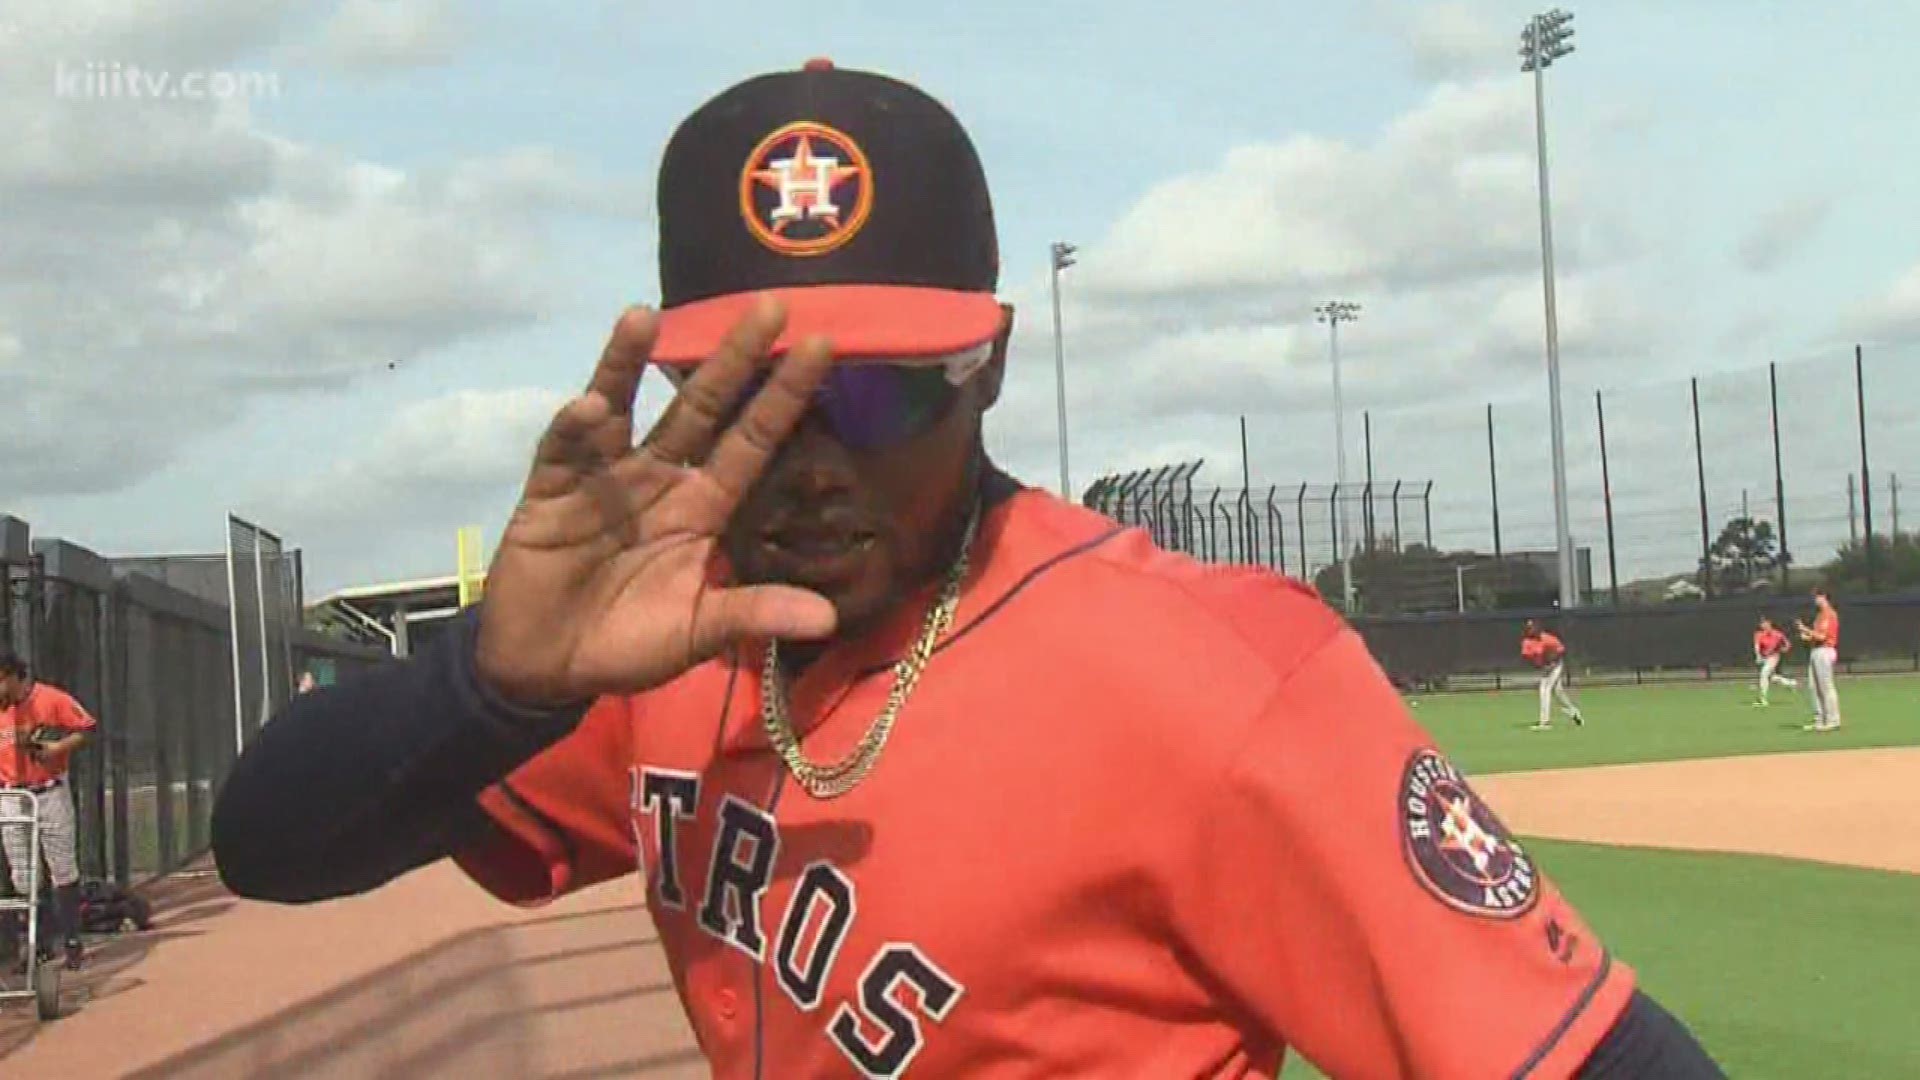 Ronnie Dawson is one of the best personalities in the Astros' minor league system, and he's expected to start the year right here in Corpus Christi.